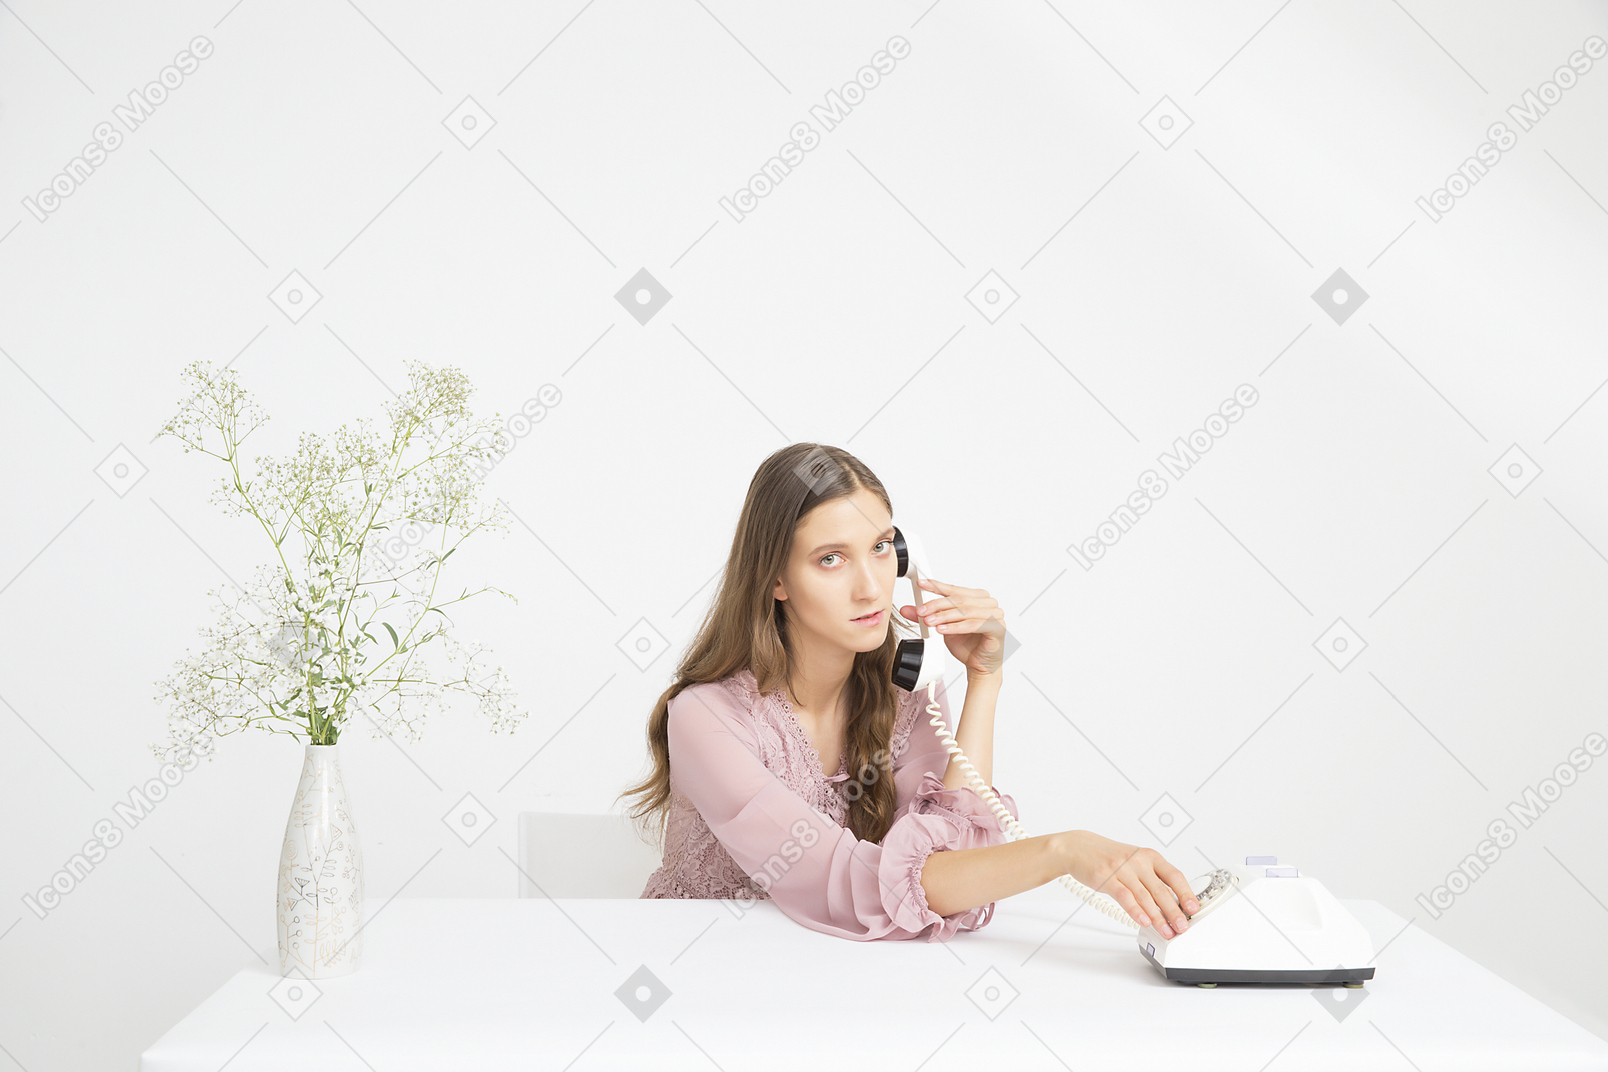 Routine time while making calls